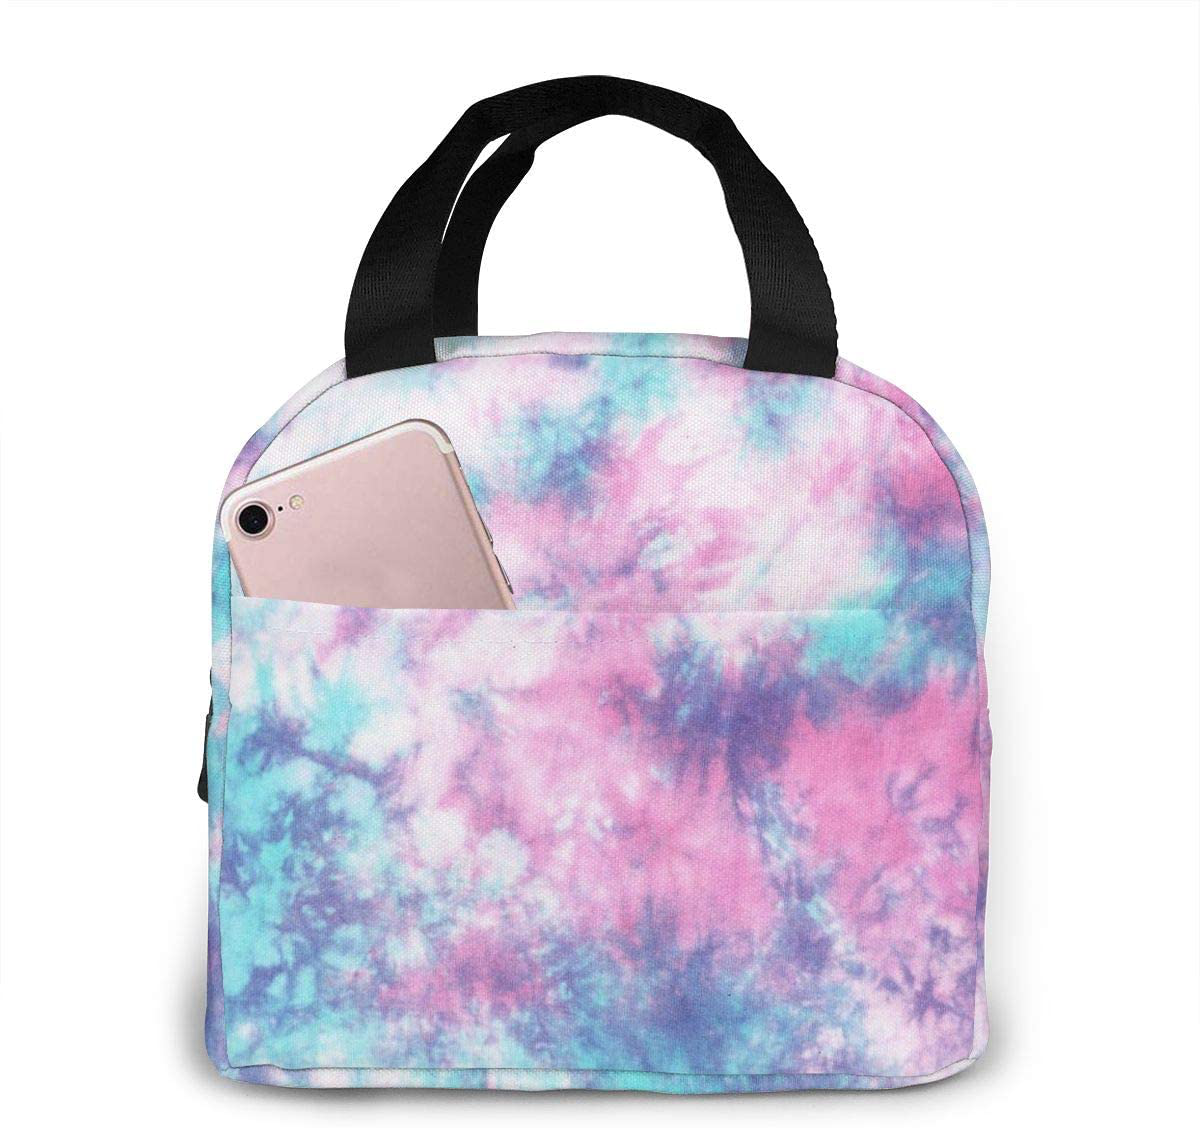 PrelerDIY Abstract Liquid Lunch Box - Insulated Lunch Bags for Women/Men Watercolor Design Reusable Lunch Tote Bags, Perfect for Office/Camping/Hiking/Picnic/Beach/Travel